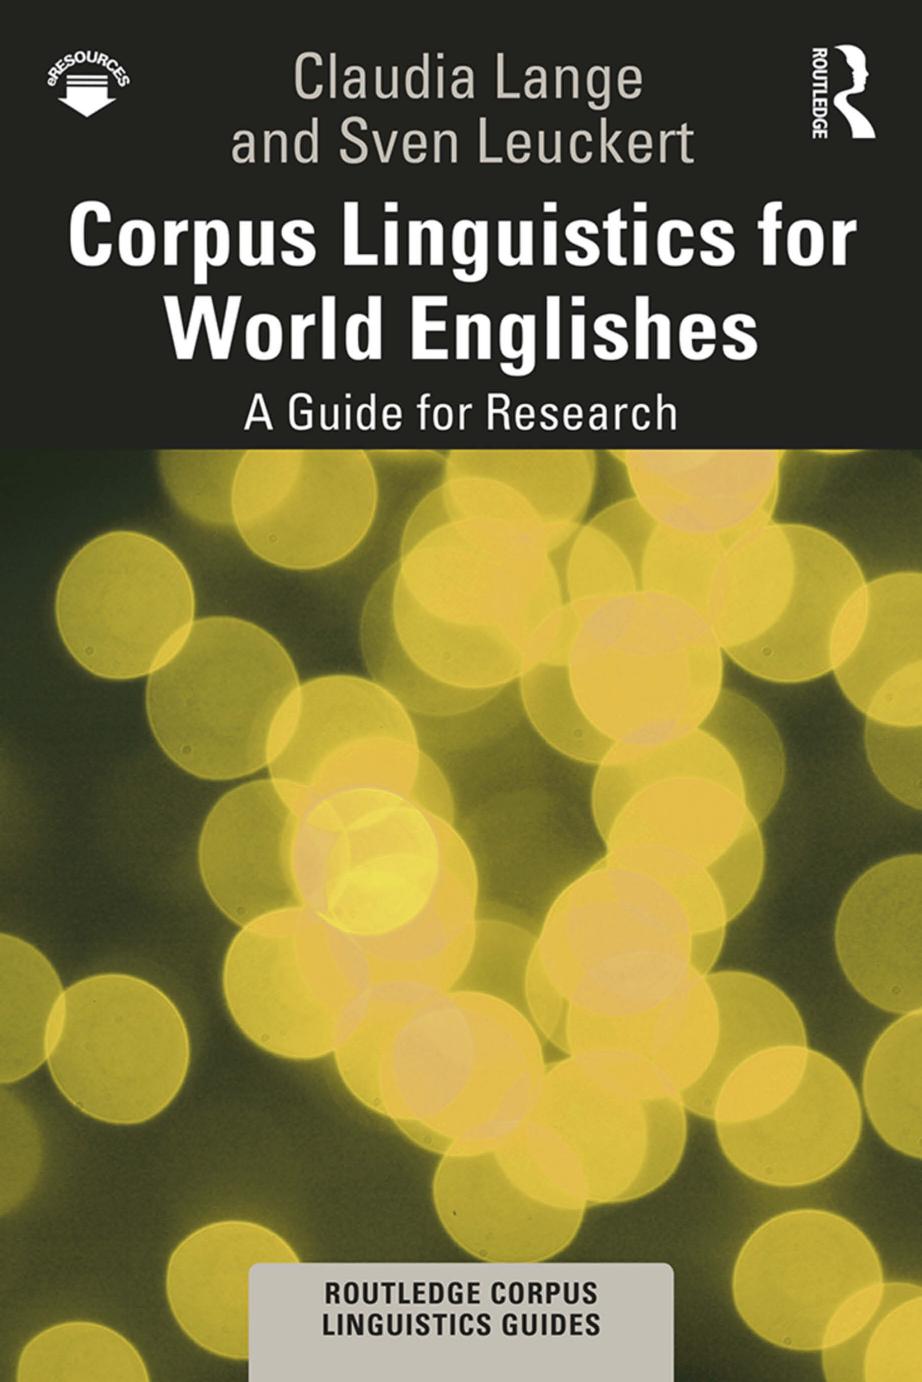 Corpus Linguistics for World Englishes: A Guide for Research